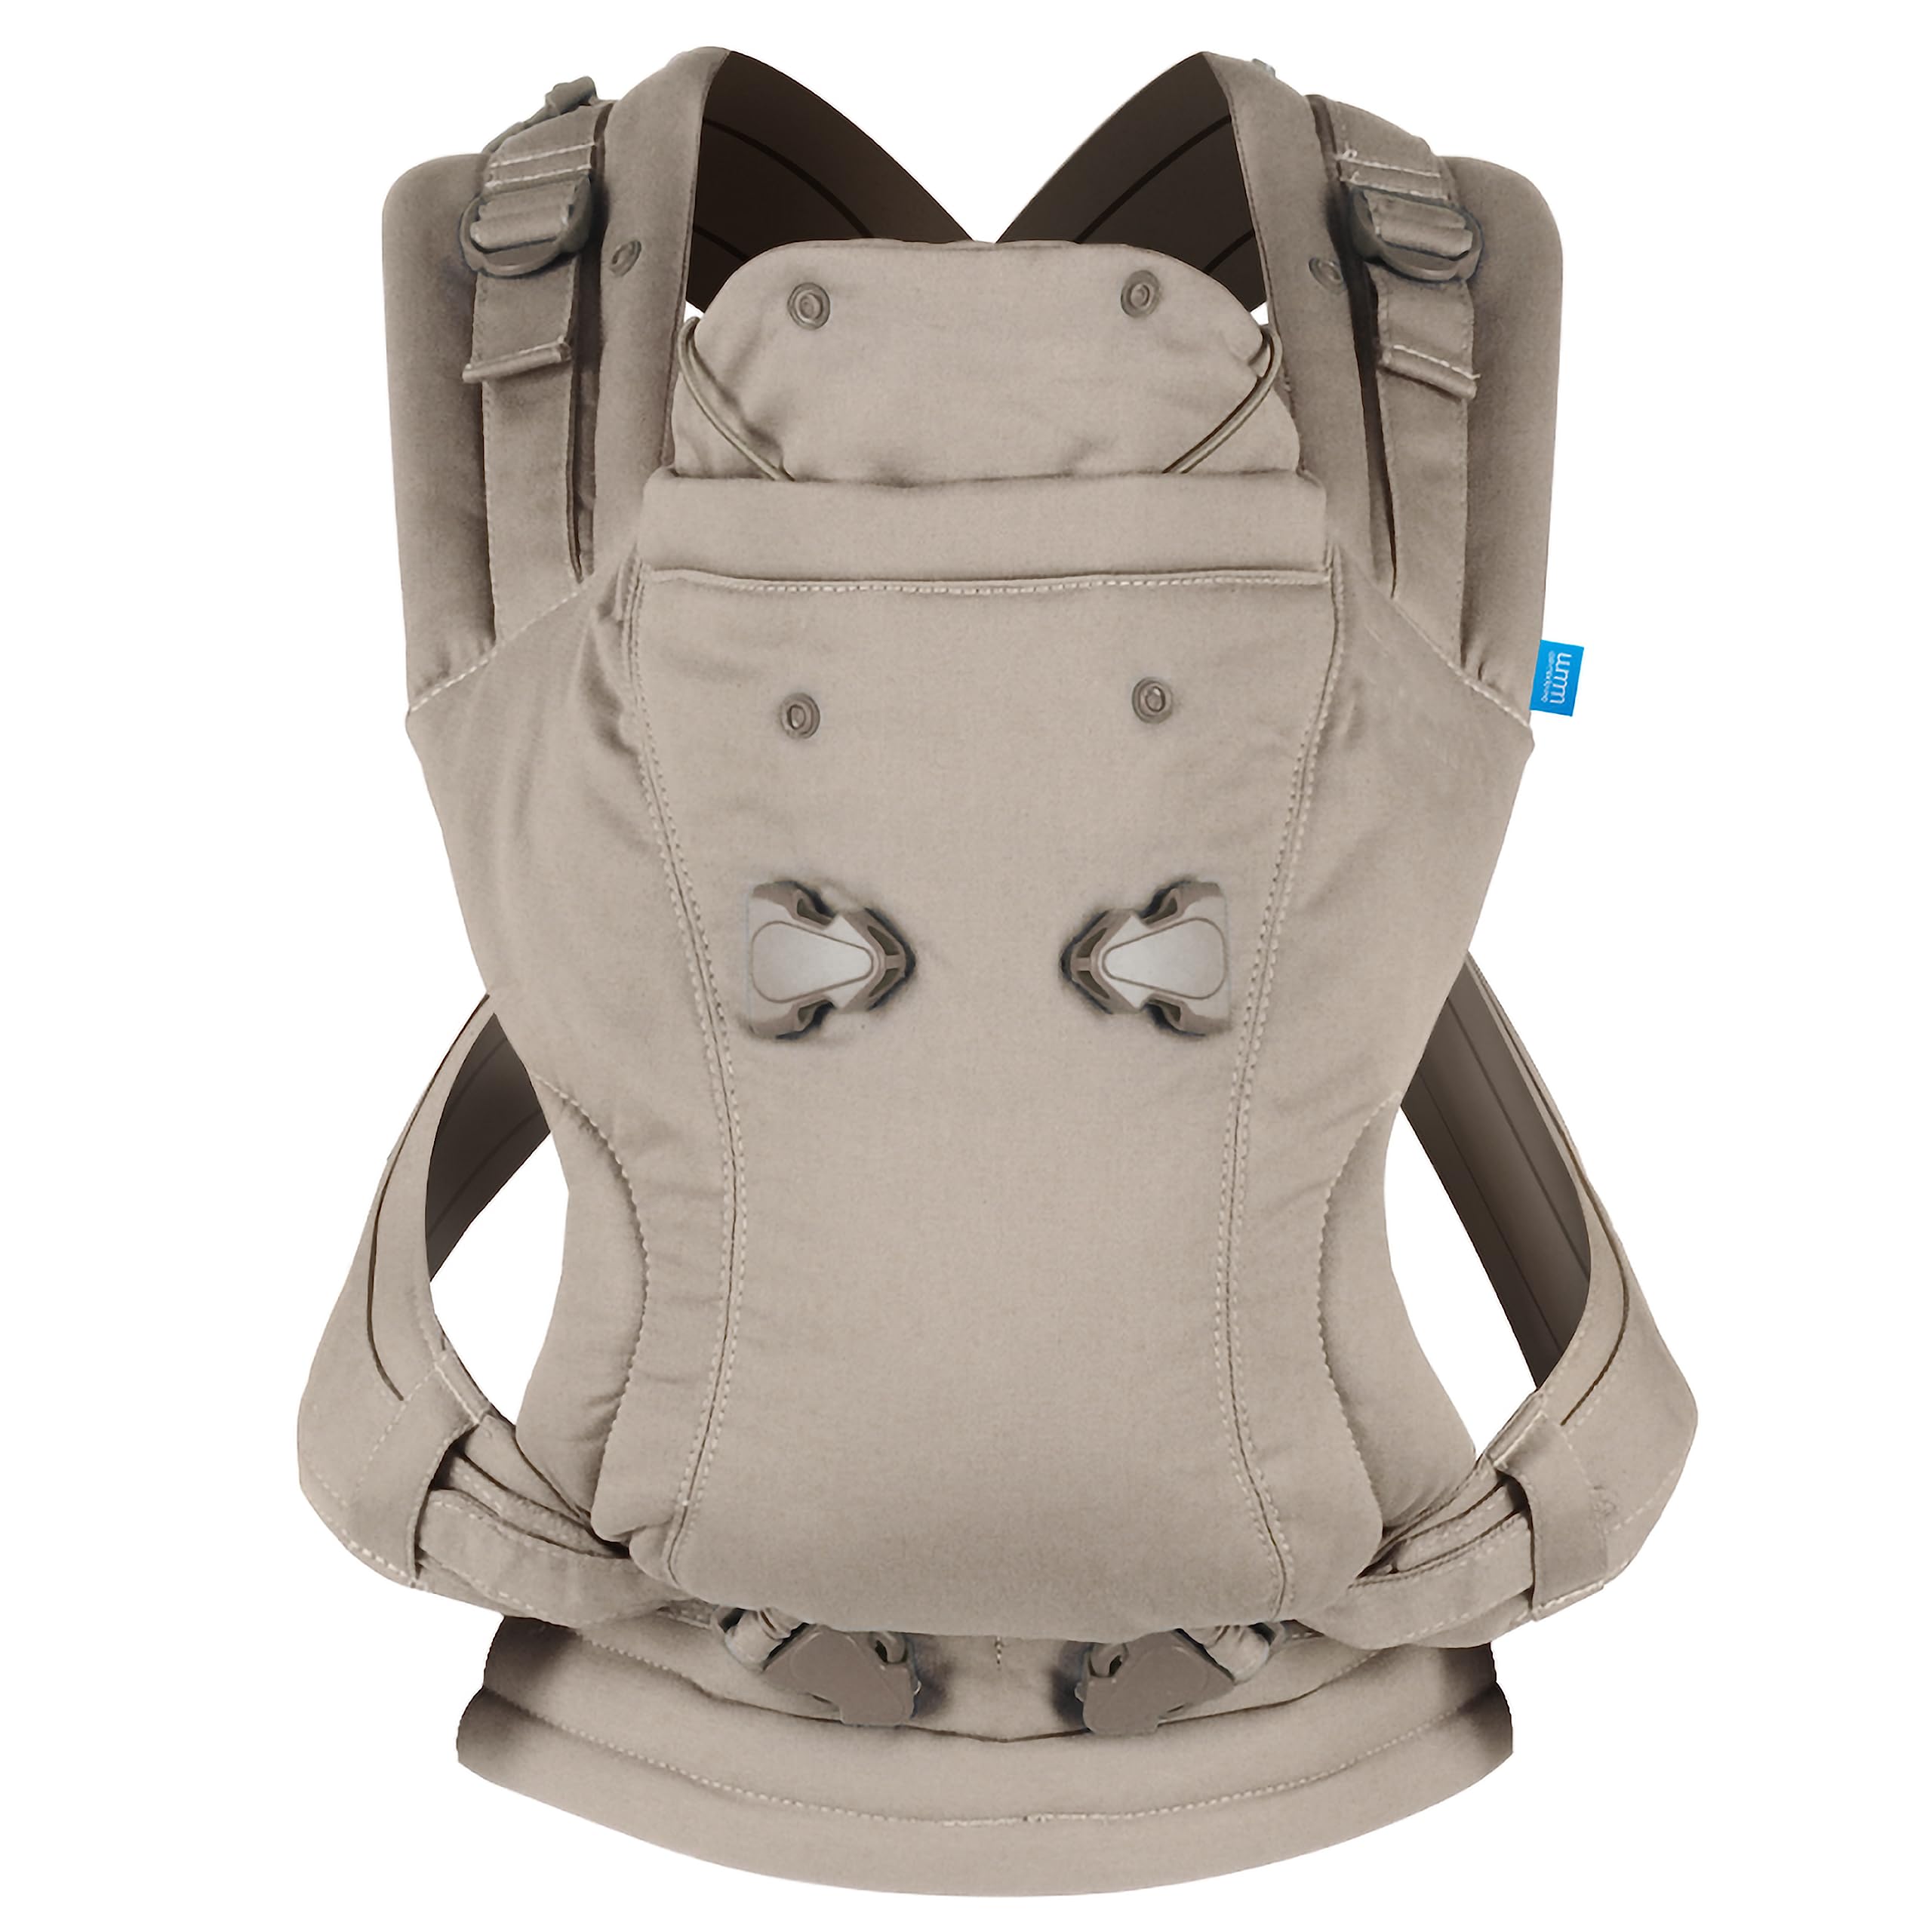 Diono We Made Me Imagine Classic 3-in-1 Newborn to Toddler Baby Carrier (Pebble) $38.13 + Free Shipping